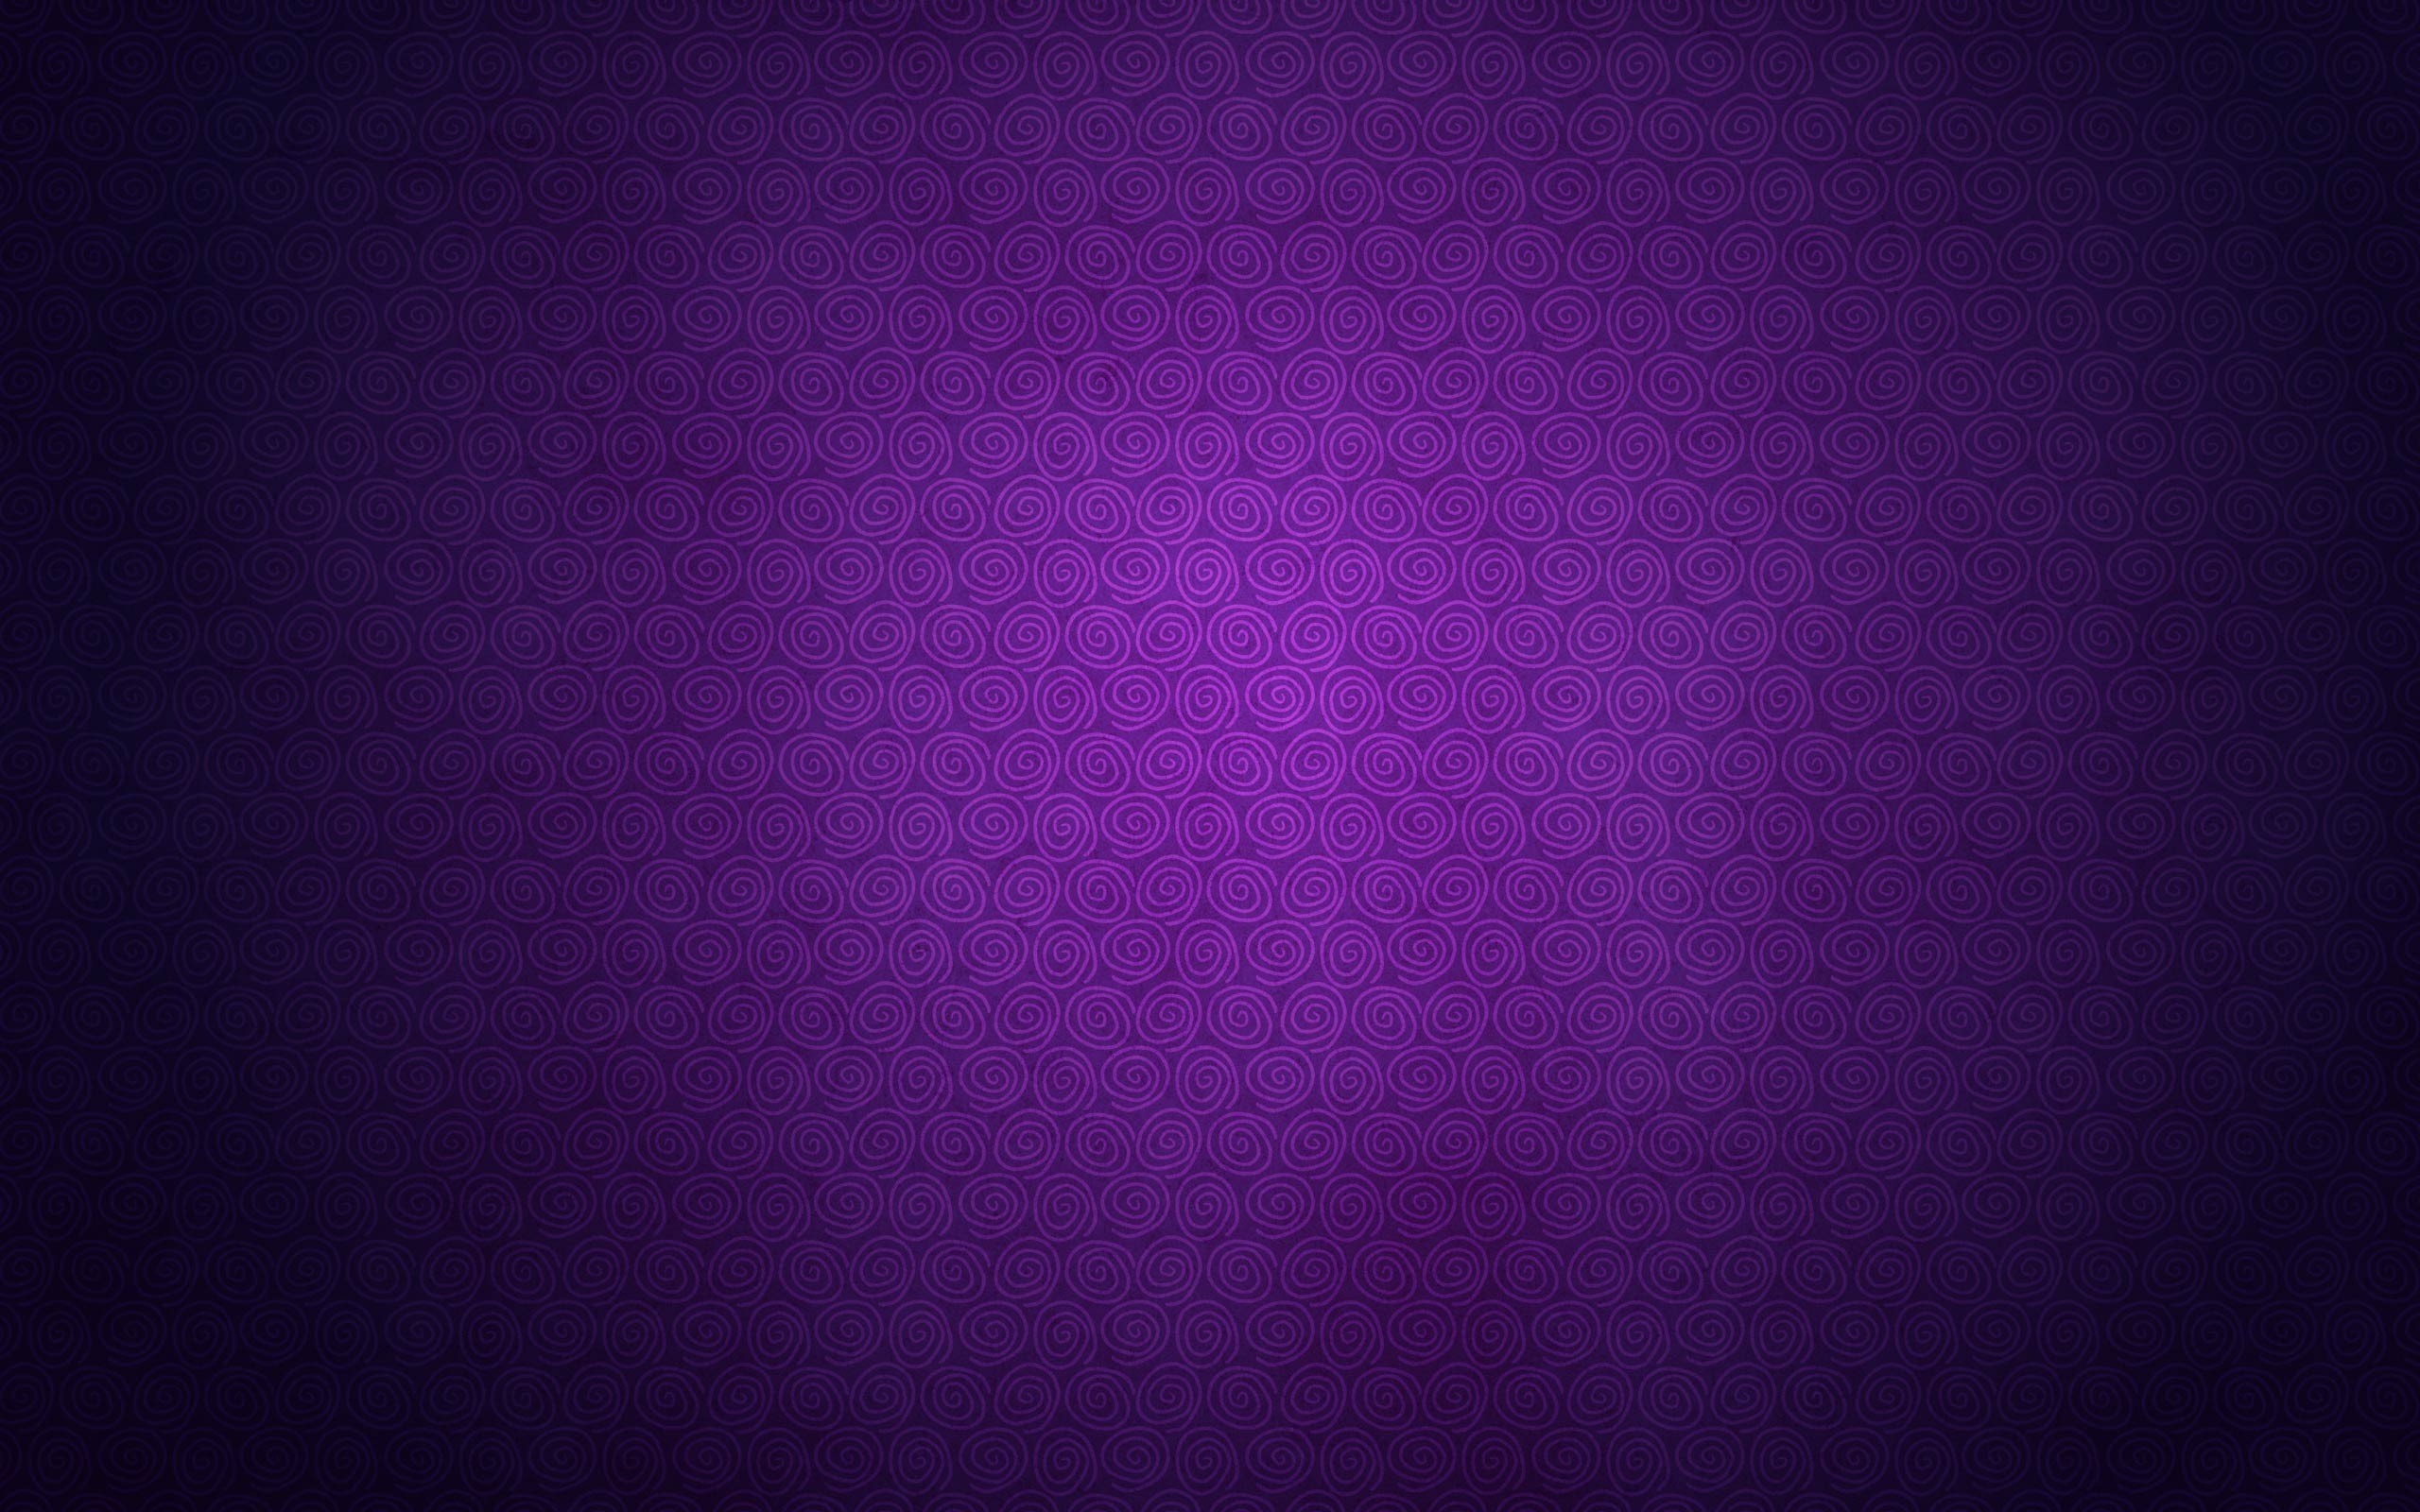 2560x1600 wallpaper abstract. simple Â· backgrounds Â· purple